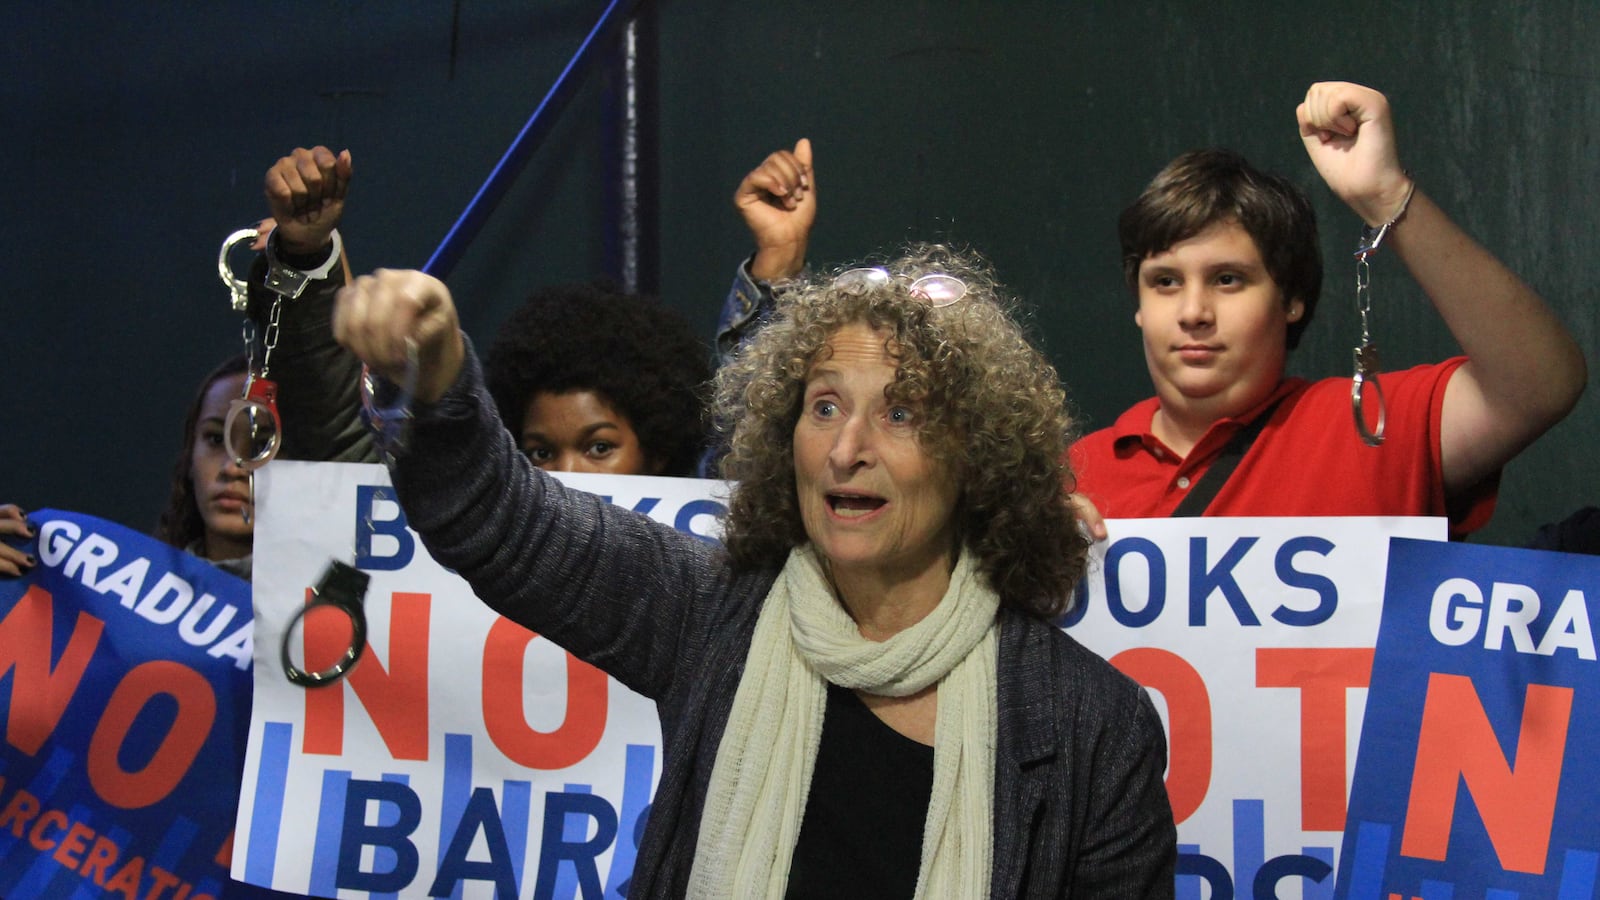 New York Civil Liberties Union Executive Director Donna Lieberman at a 2014 rally calling for reforms to the city’s school discipline policies.